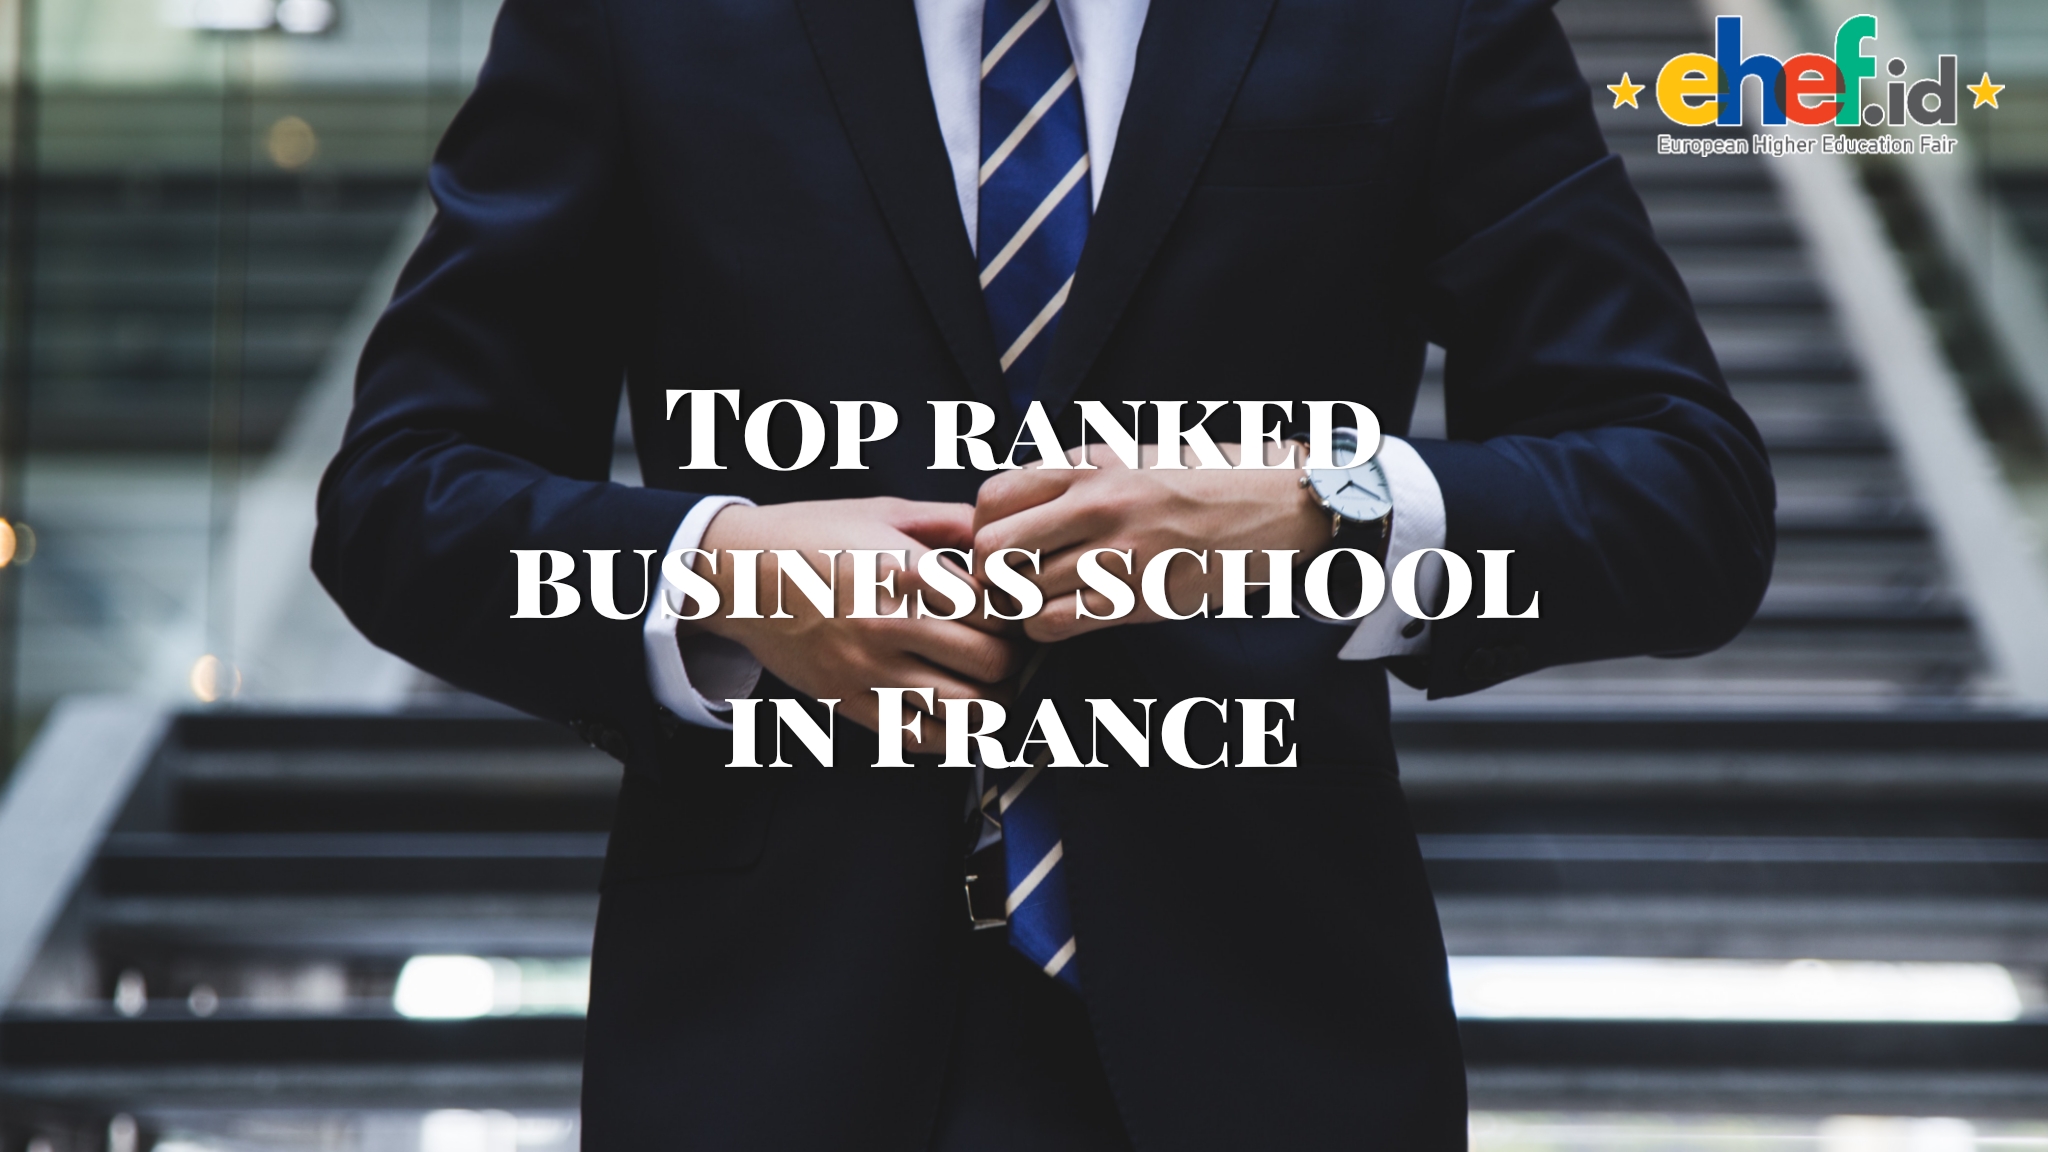 Which are the Top Ranked Business Schools in France?